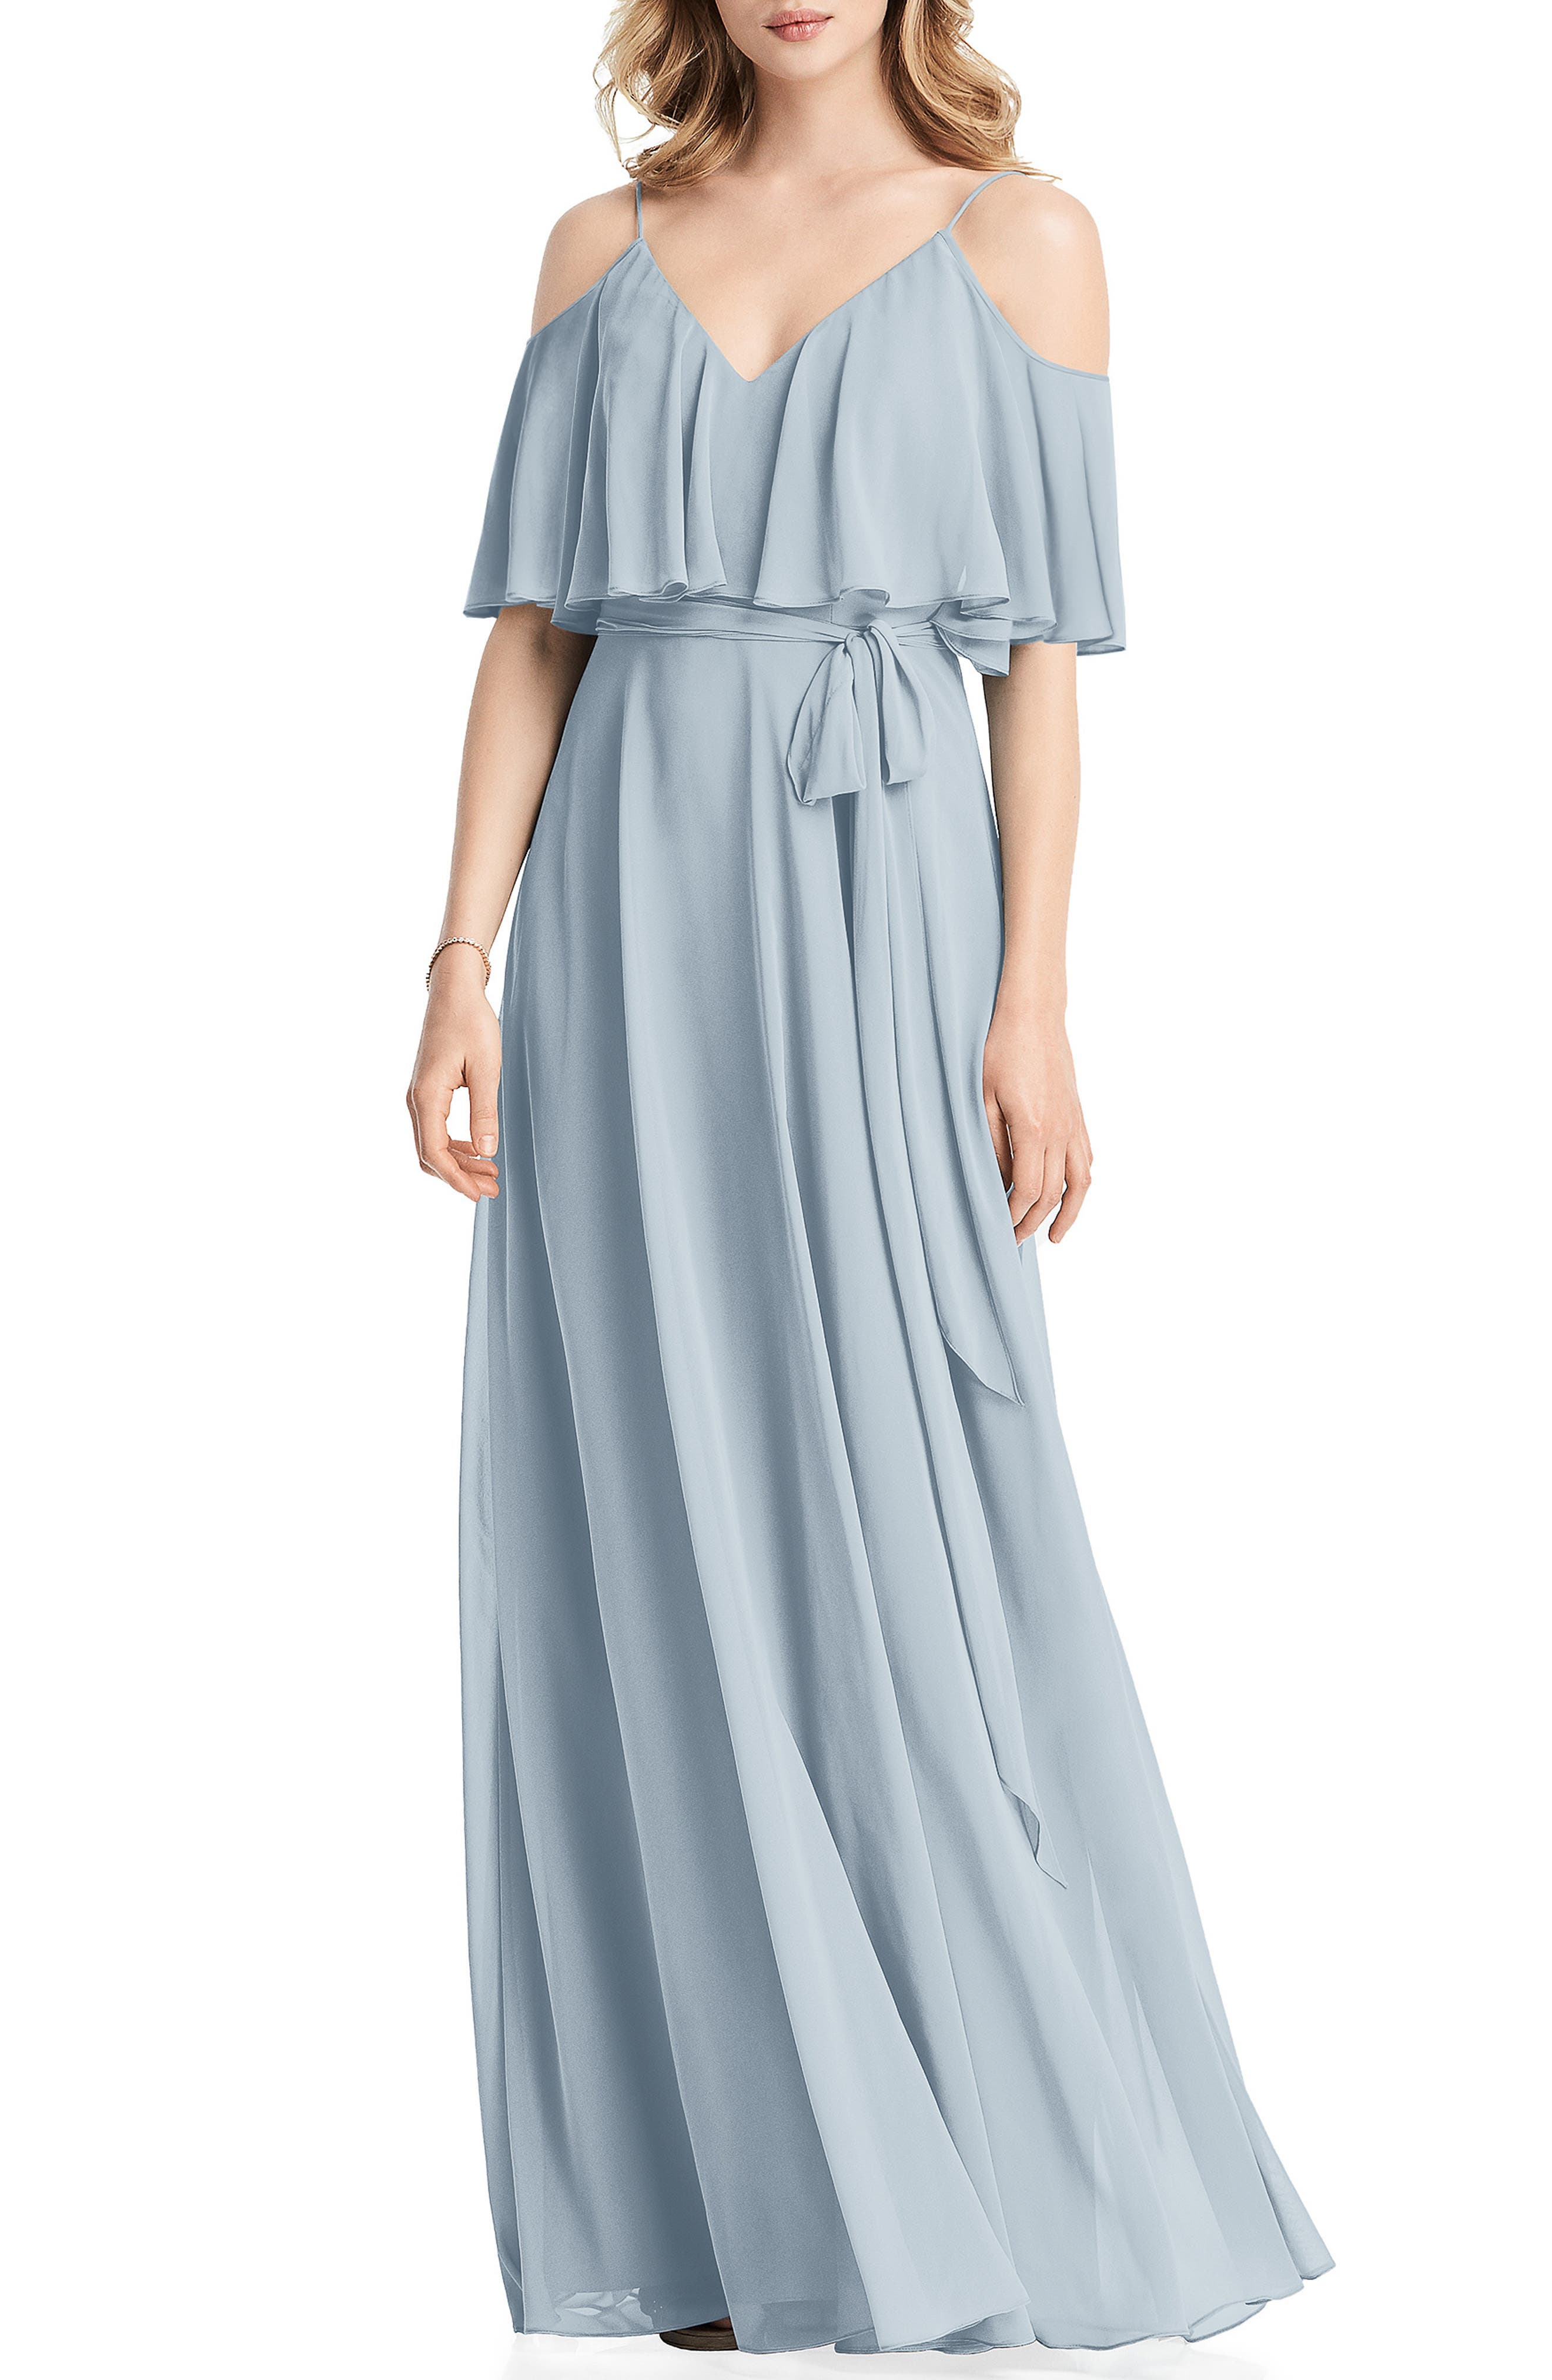 ONLYCE Short A-Line Ruffled Cold-Shoulder Bridesmaid Dress Chiffon Evening Gowns 